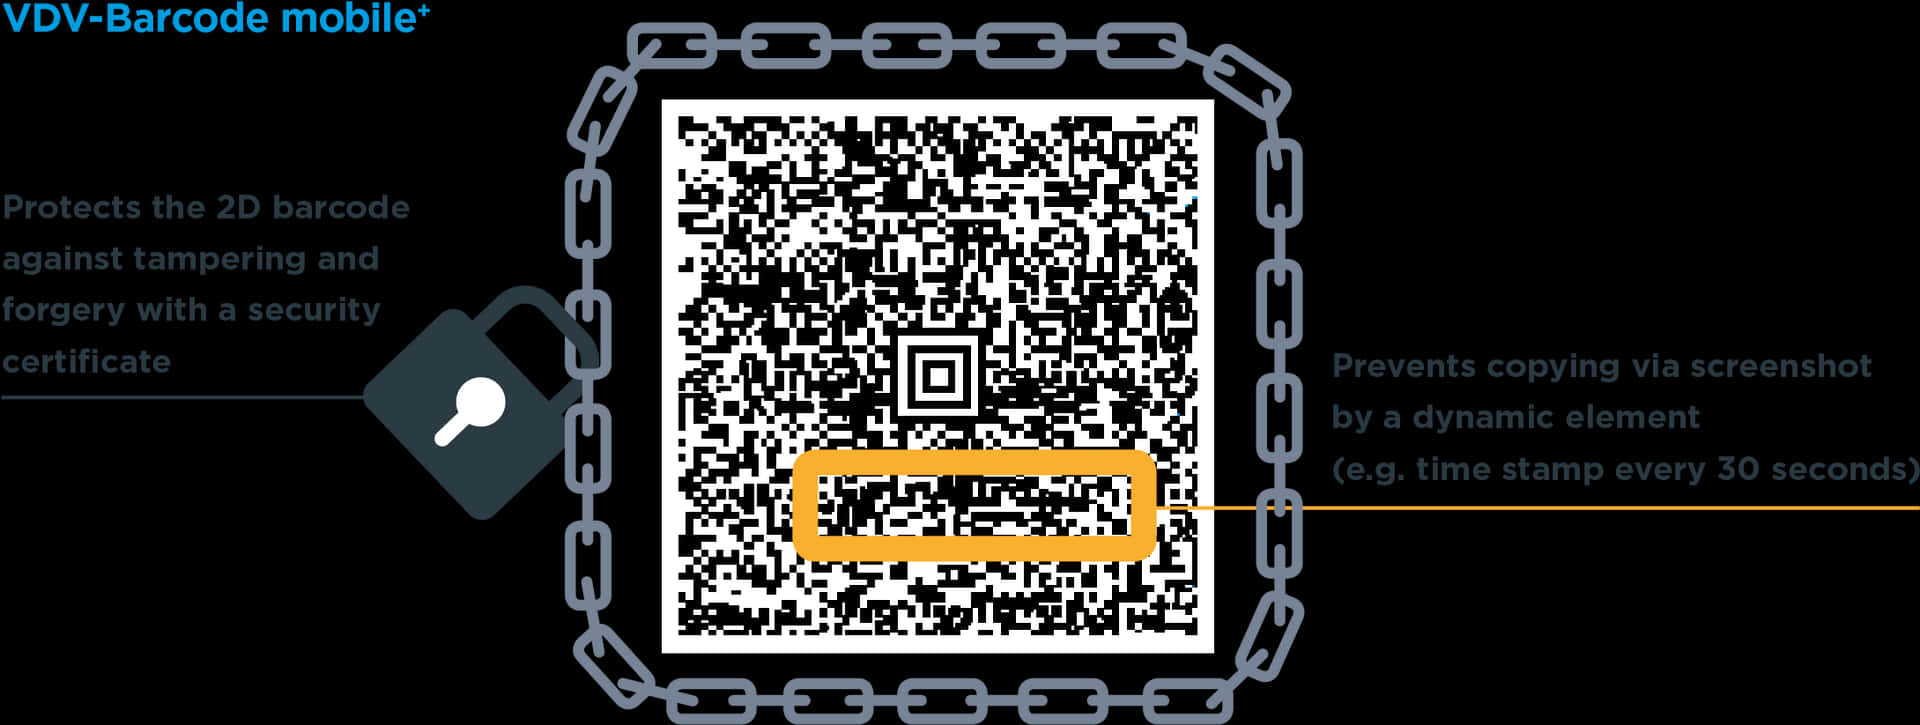 Secure2 D Barcode Technology Mobile PNG